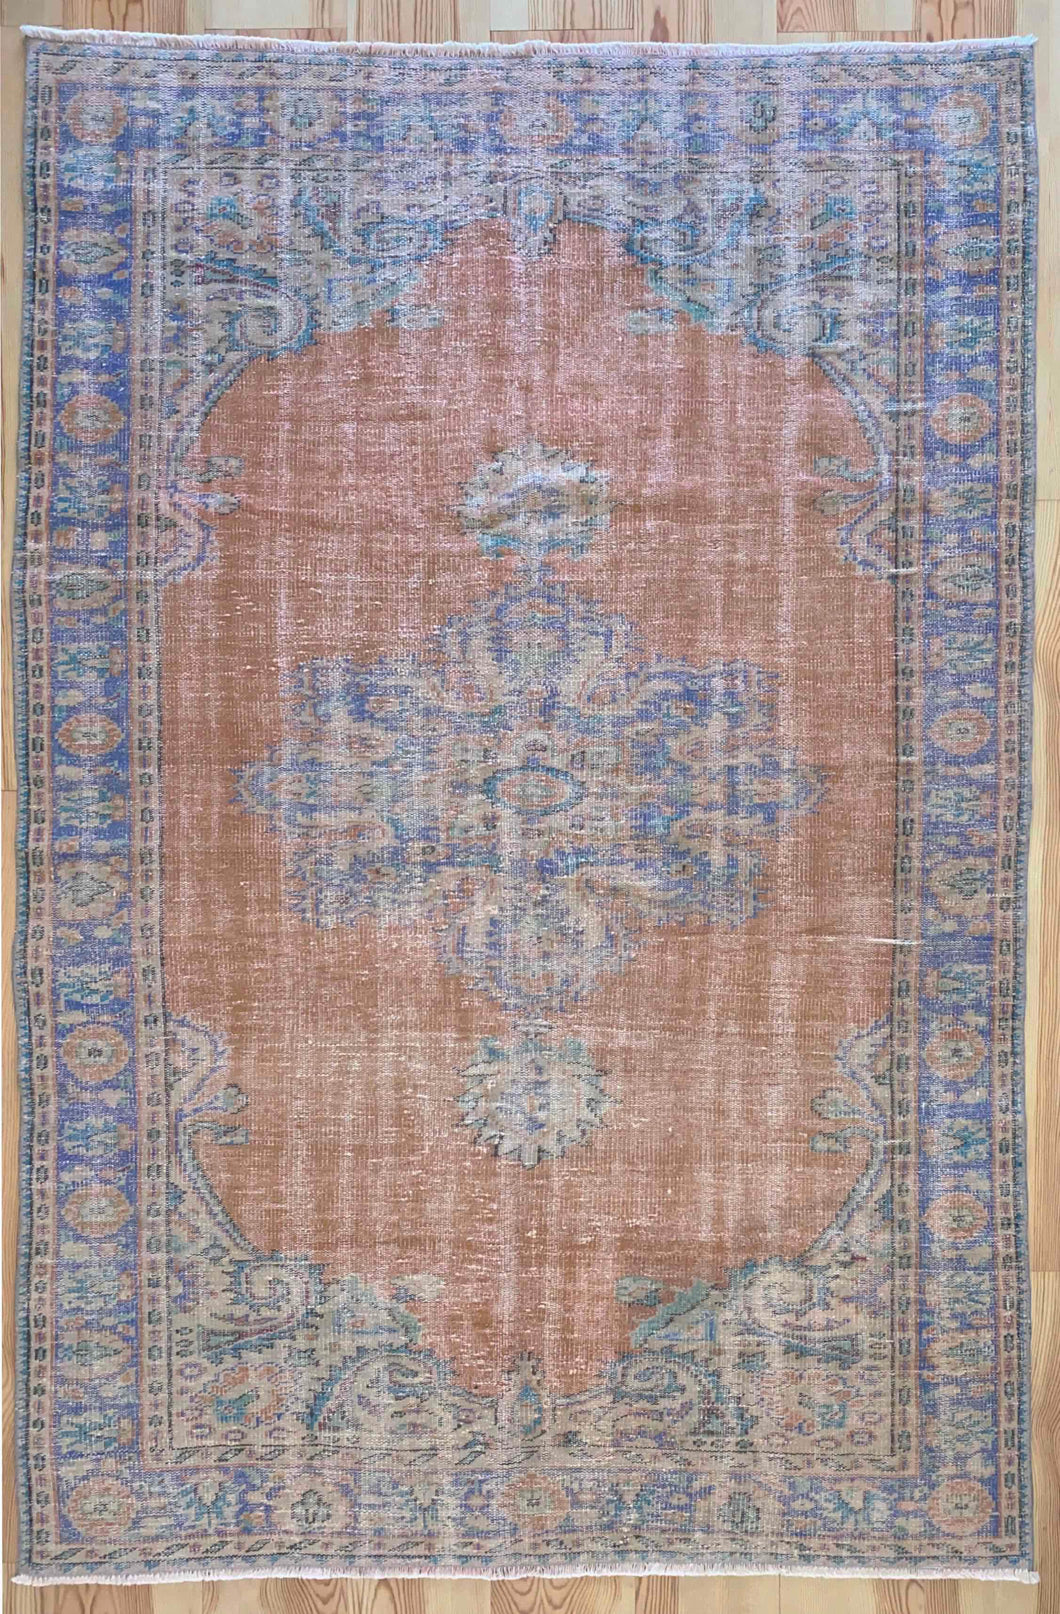 6x9 Vintage Central Anatolian Oushak Style Turkish Area Rug Bold Medallion Muted Colors Spacious Field Ornate Corners | SKU 600